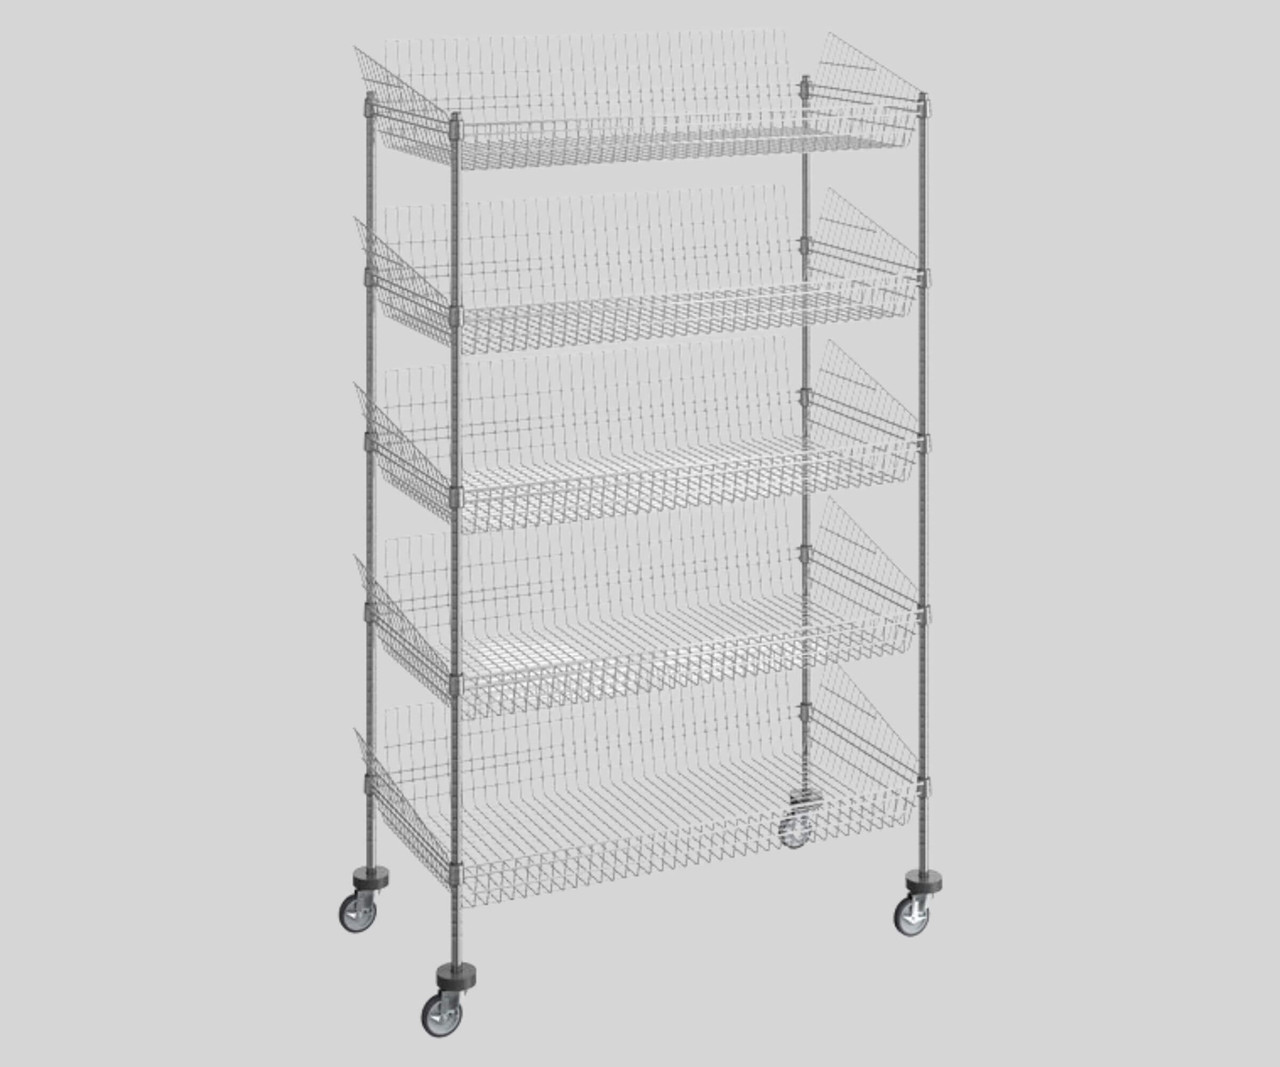 Chicken Pieces CP 24" x 48" x 80" NSF Chrome Mobile 5 Basket Retail Storage Display Stand | Mobile Retail Excellence